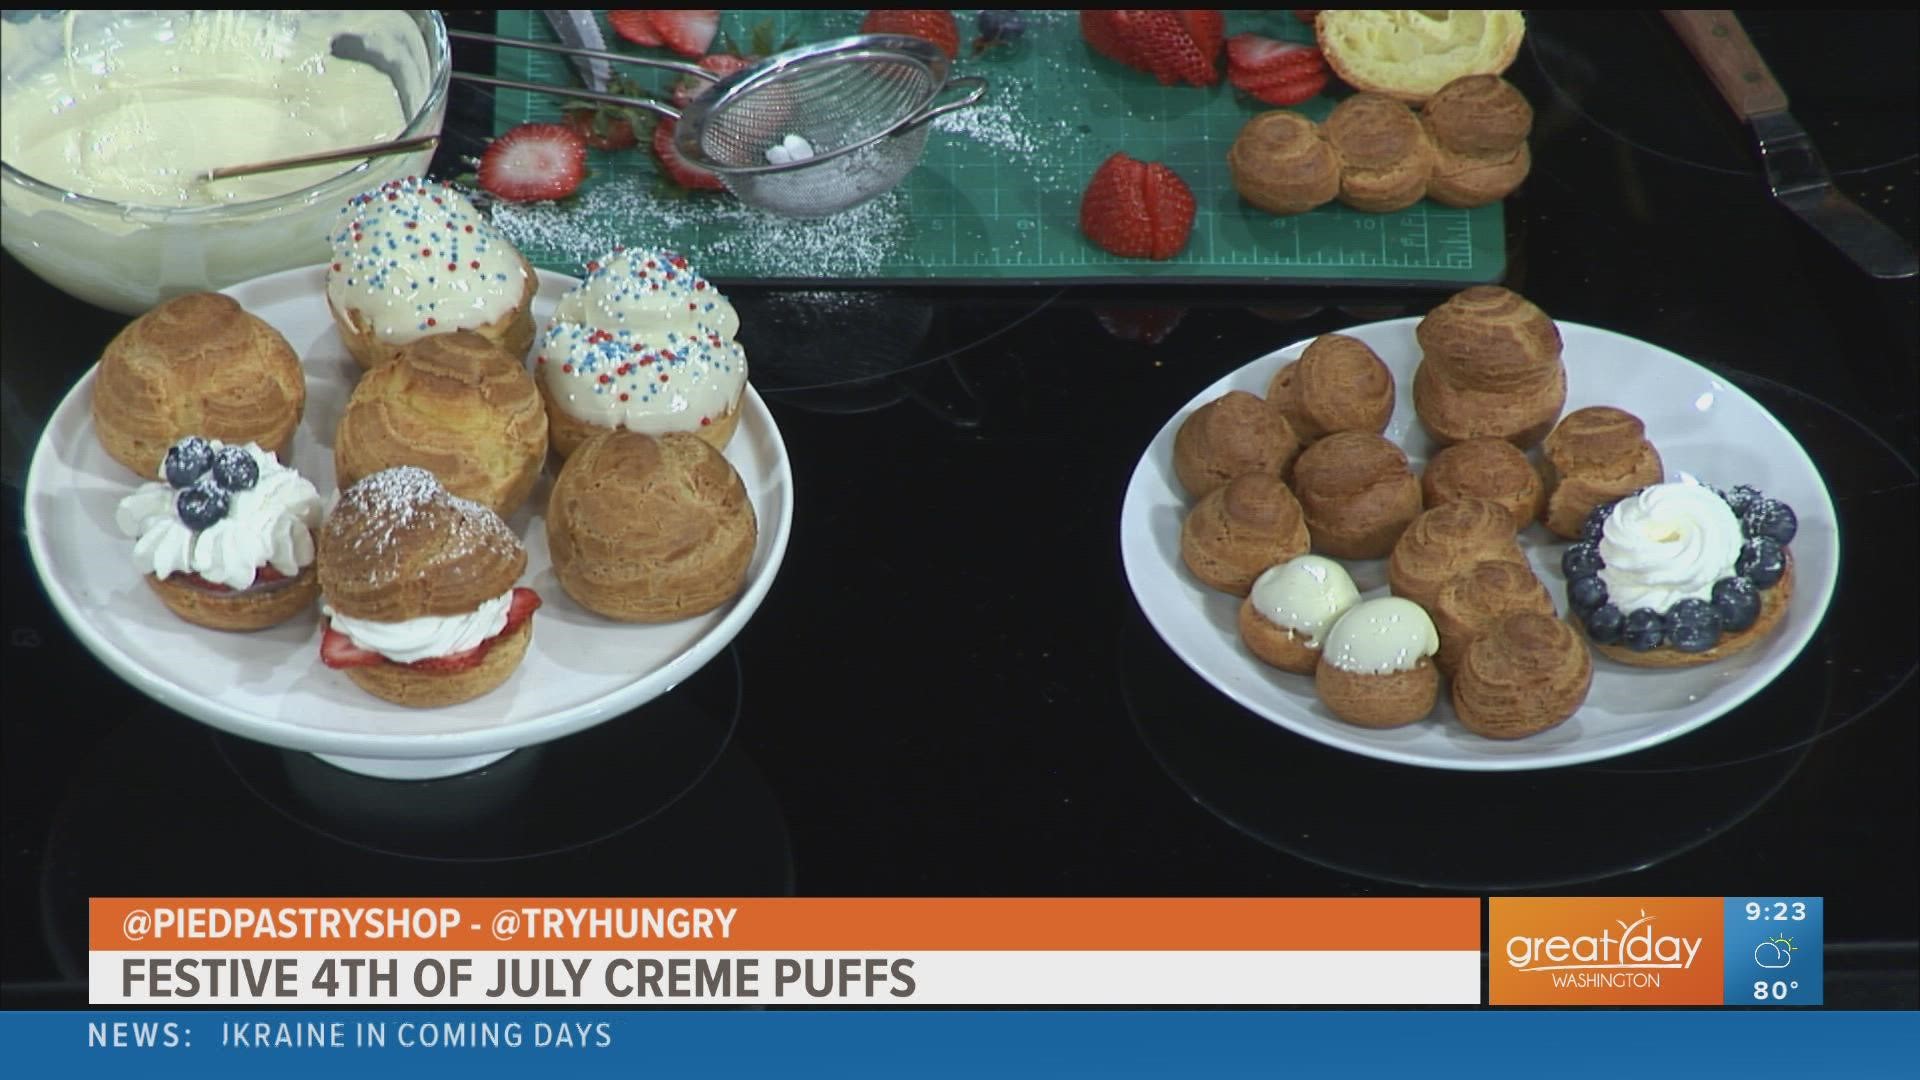 Pastry Chef Jessica Lewis has cooked for former President Obama and today she shares her Independence Day themed creme puffs.